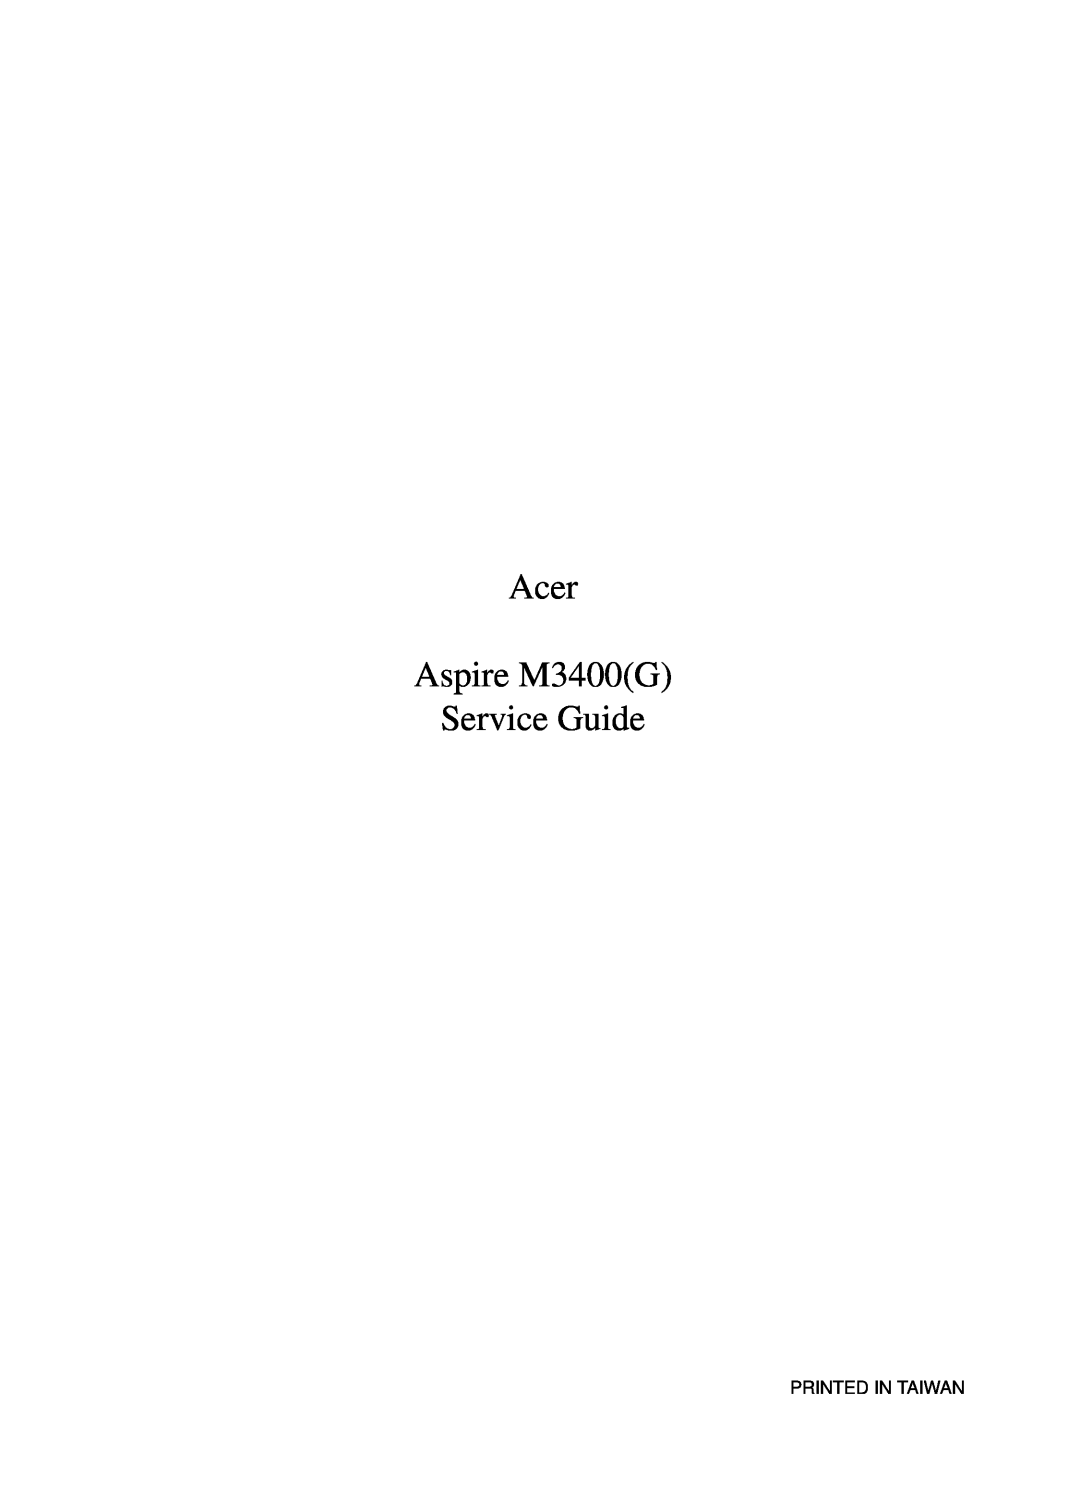 Acer m3400(g) manual Acer Aspire M3400G Service Guide, Printed In Taiwan 